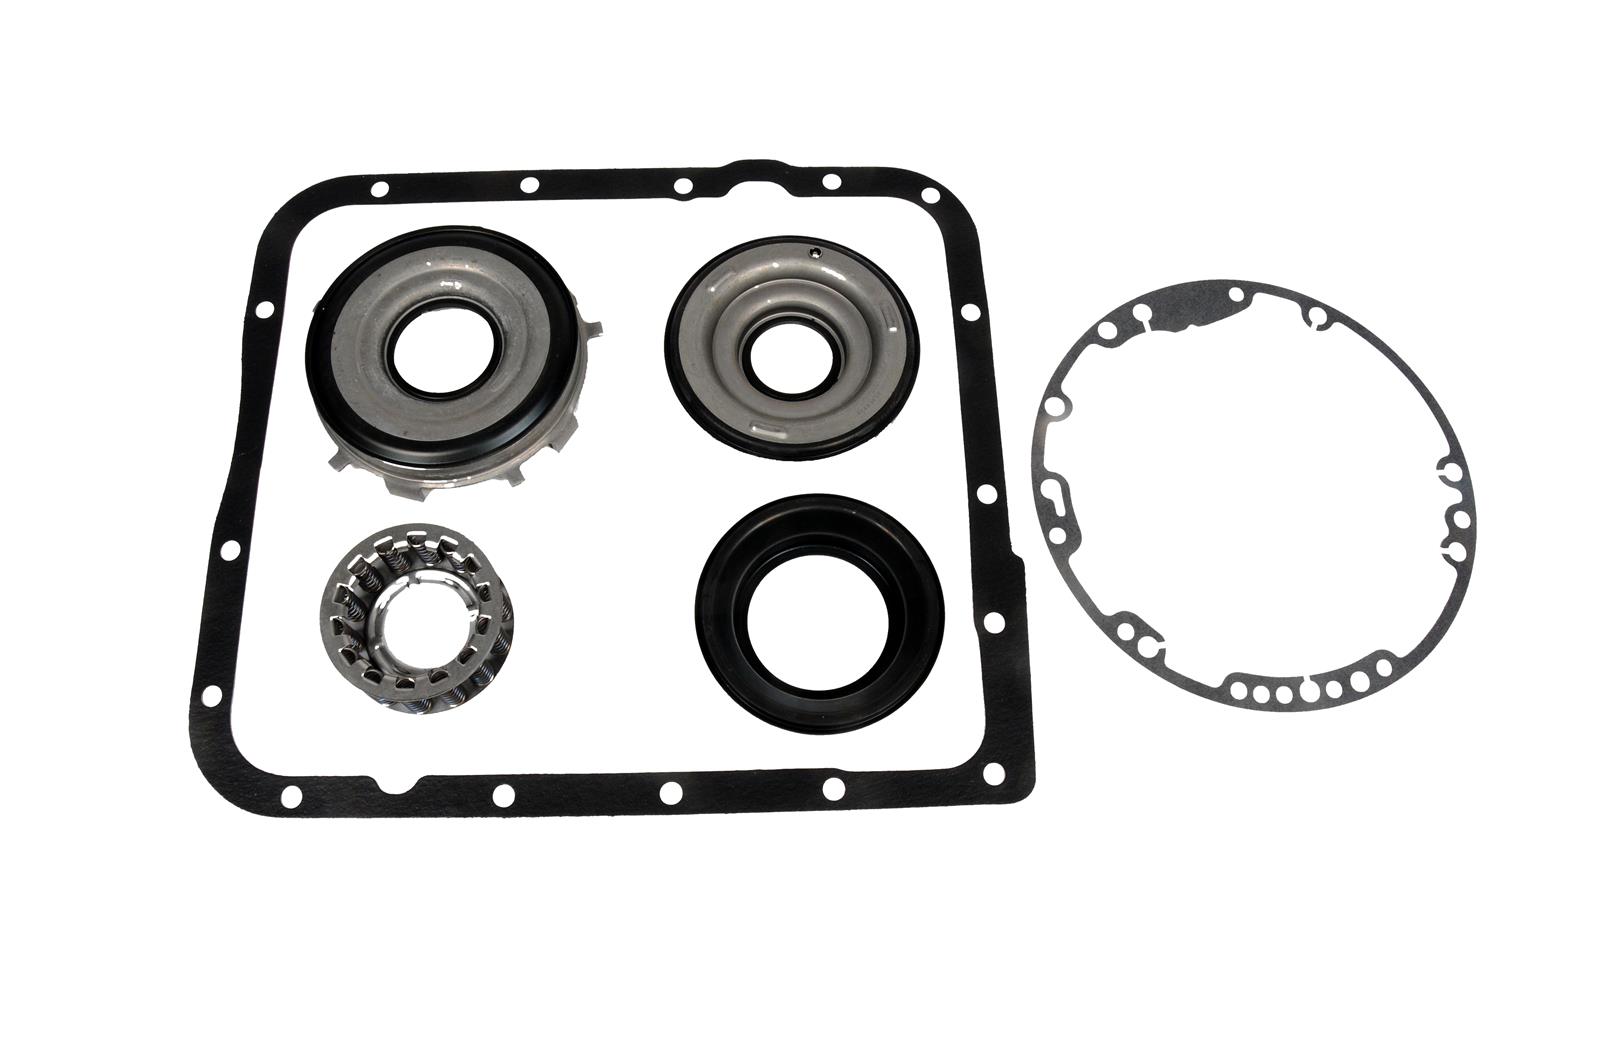 ACDelco 19300335 ACDelco GM Genuine Parts Automatic Transmission Gasket Kits  Summit Racing